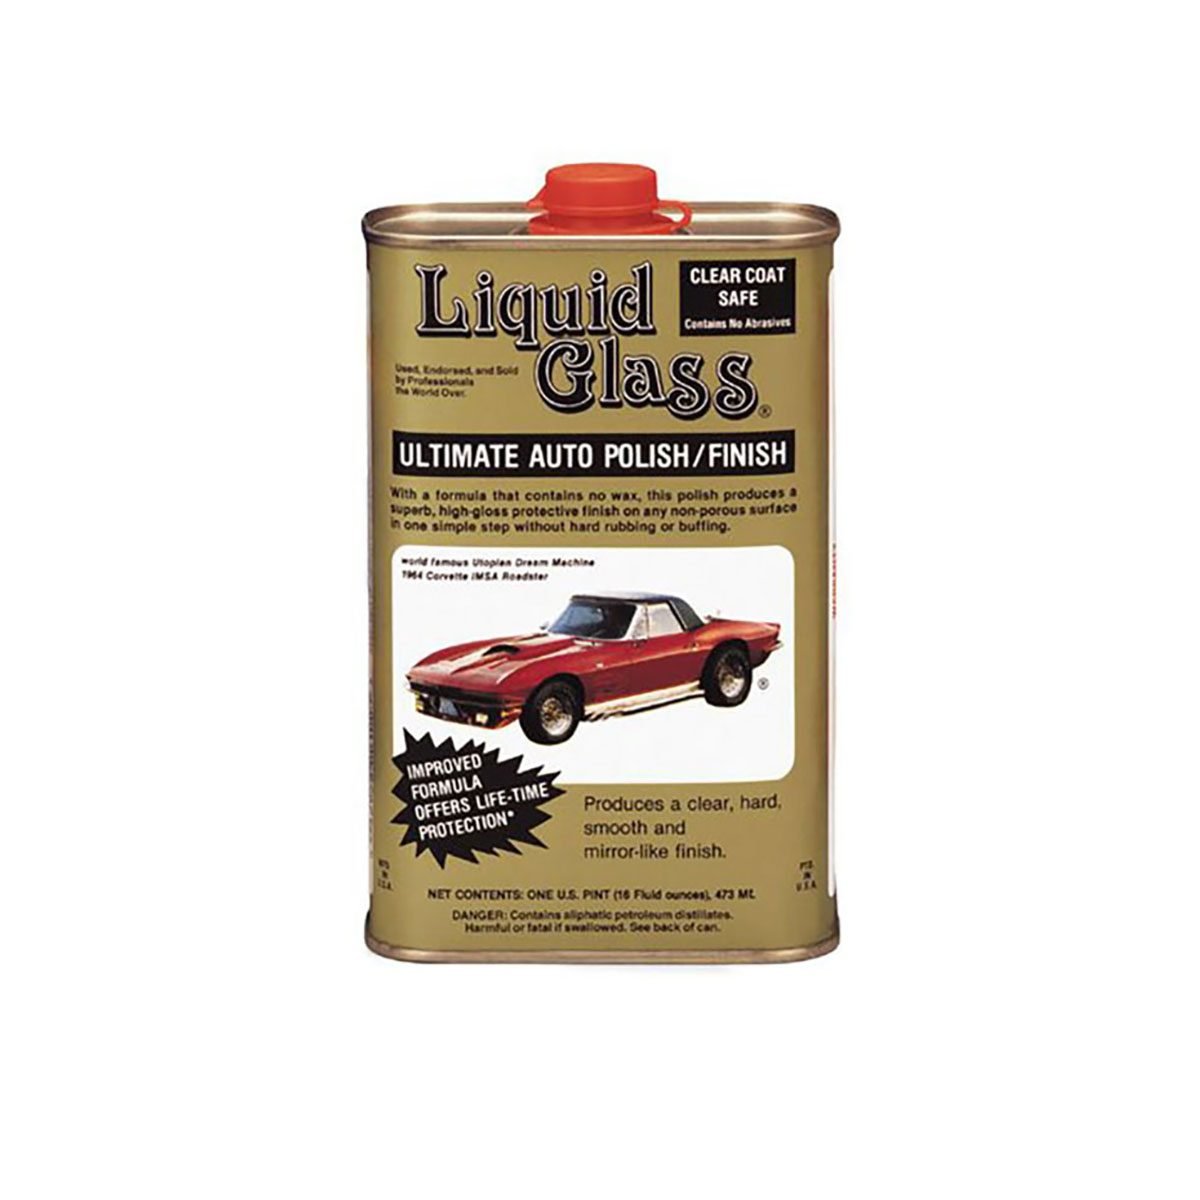 What's the Big Deal About Liquid Glass Car Wax?